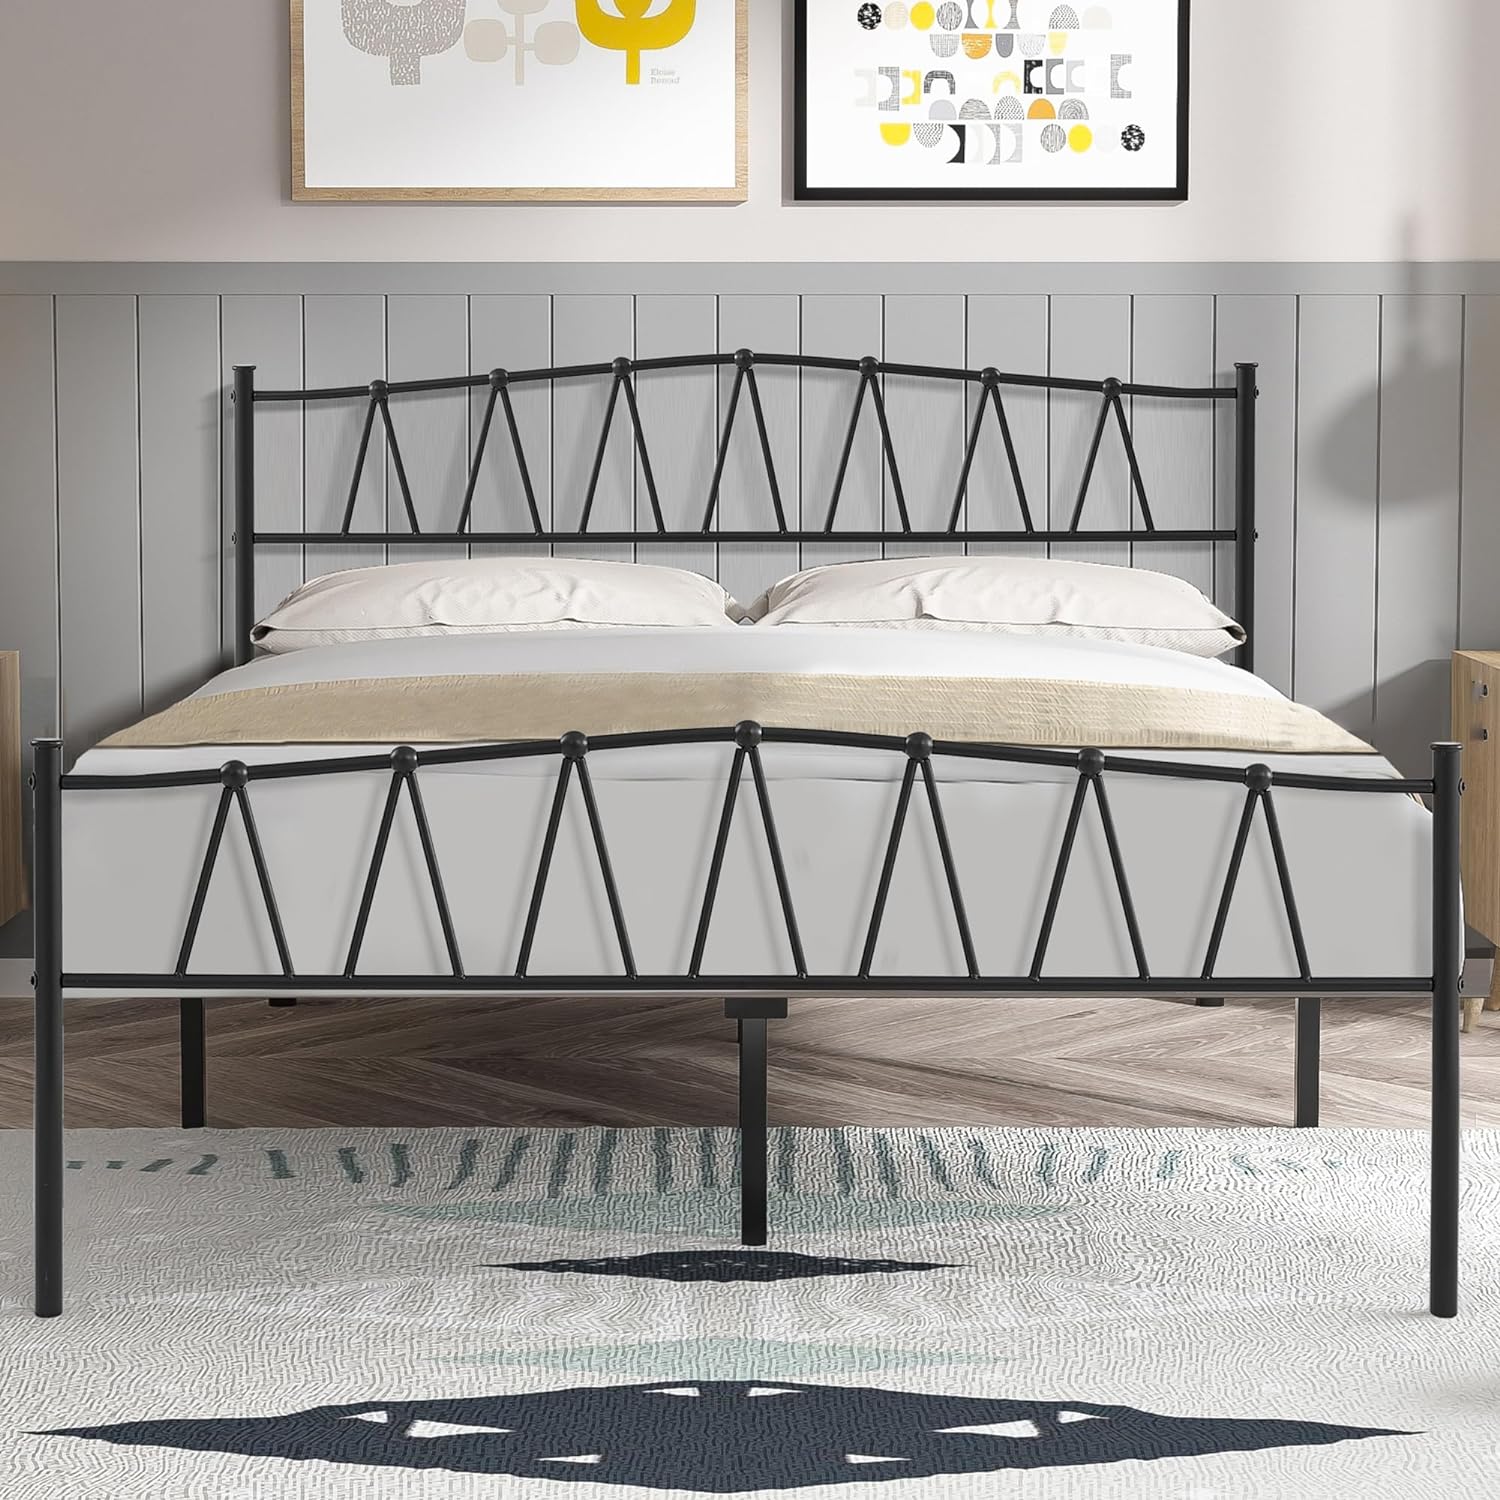 VECELO Vintage Metal Platform Bed Frame with Headboard and Footboard Matress Foundation No Box Spring Needed